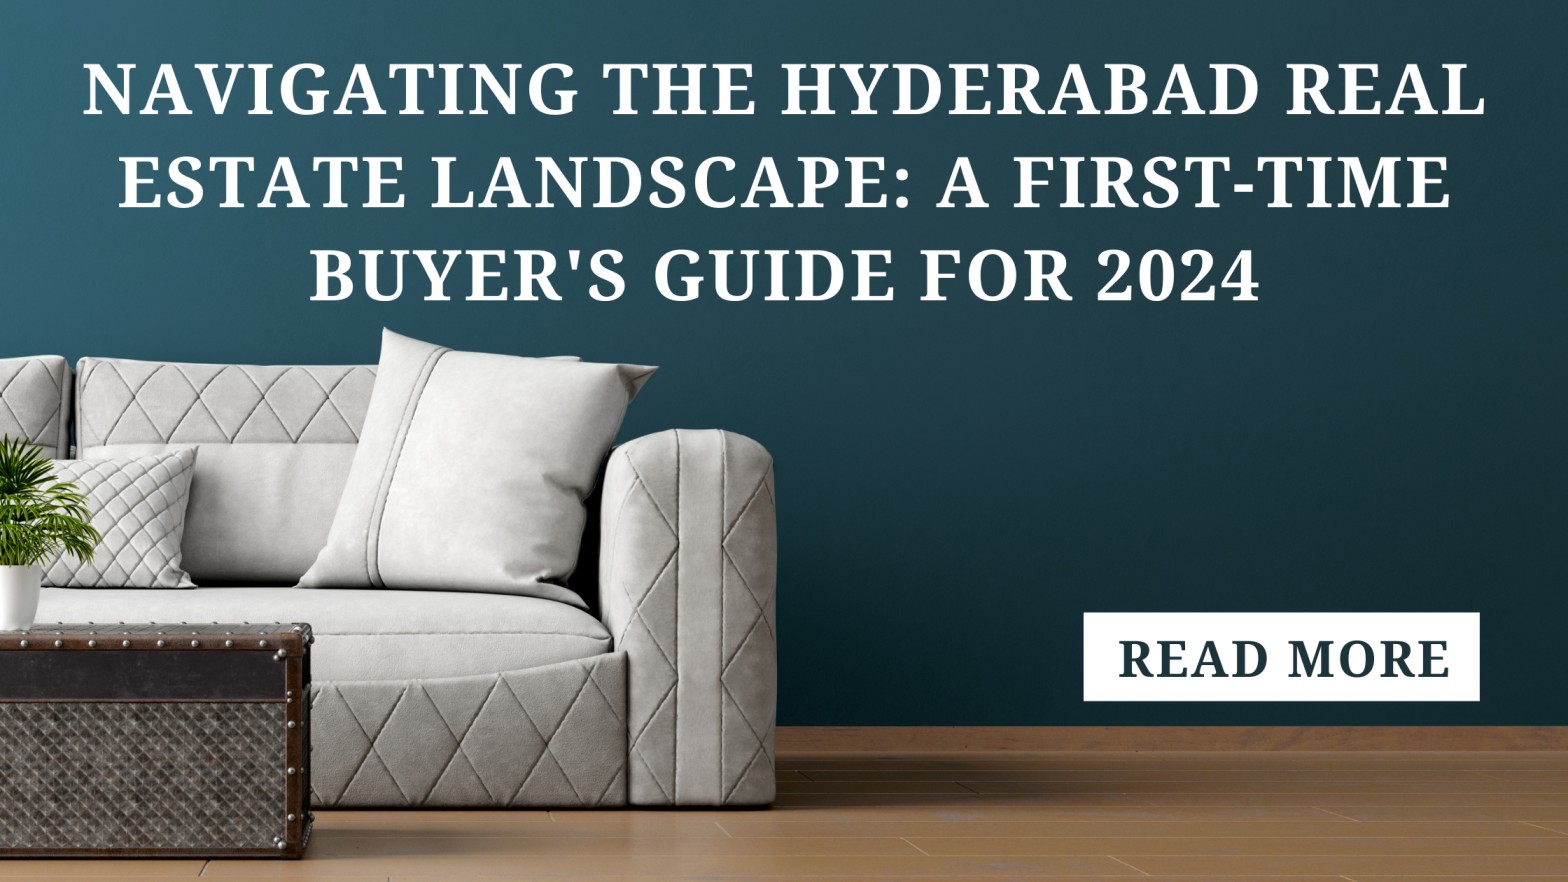 Navigating the Hyderabad Real Estate Landscape: A First-Time Buyer’s Guide for 2024